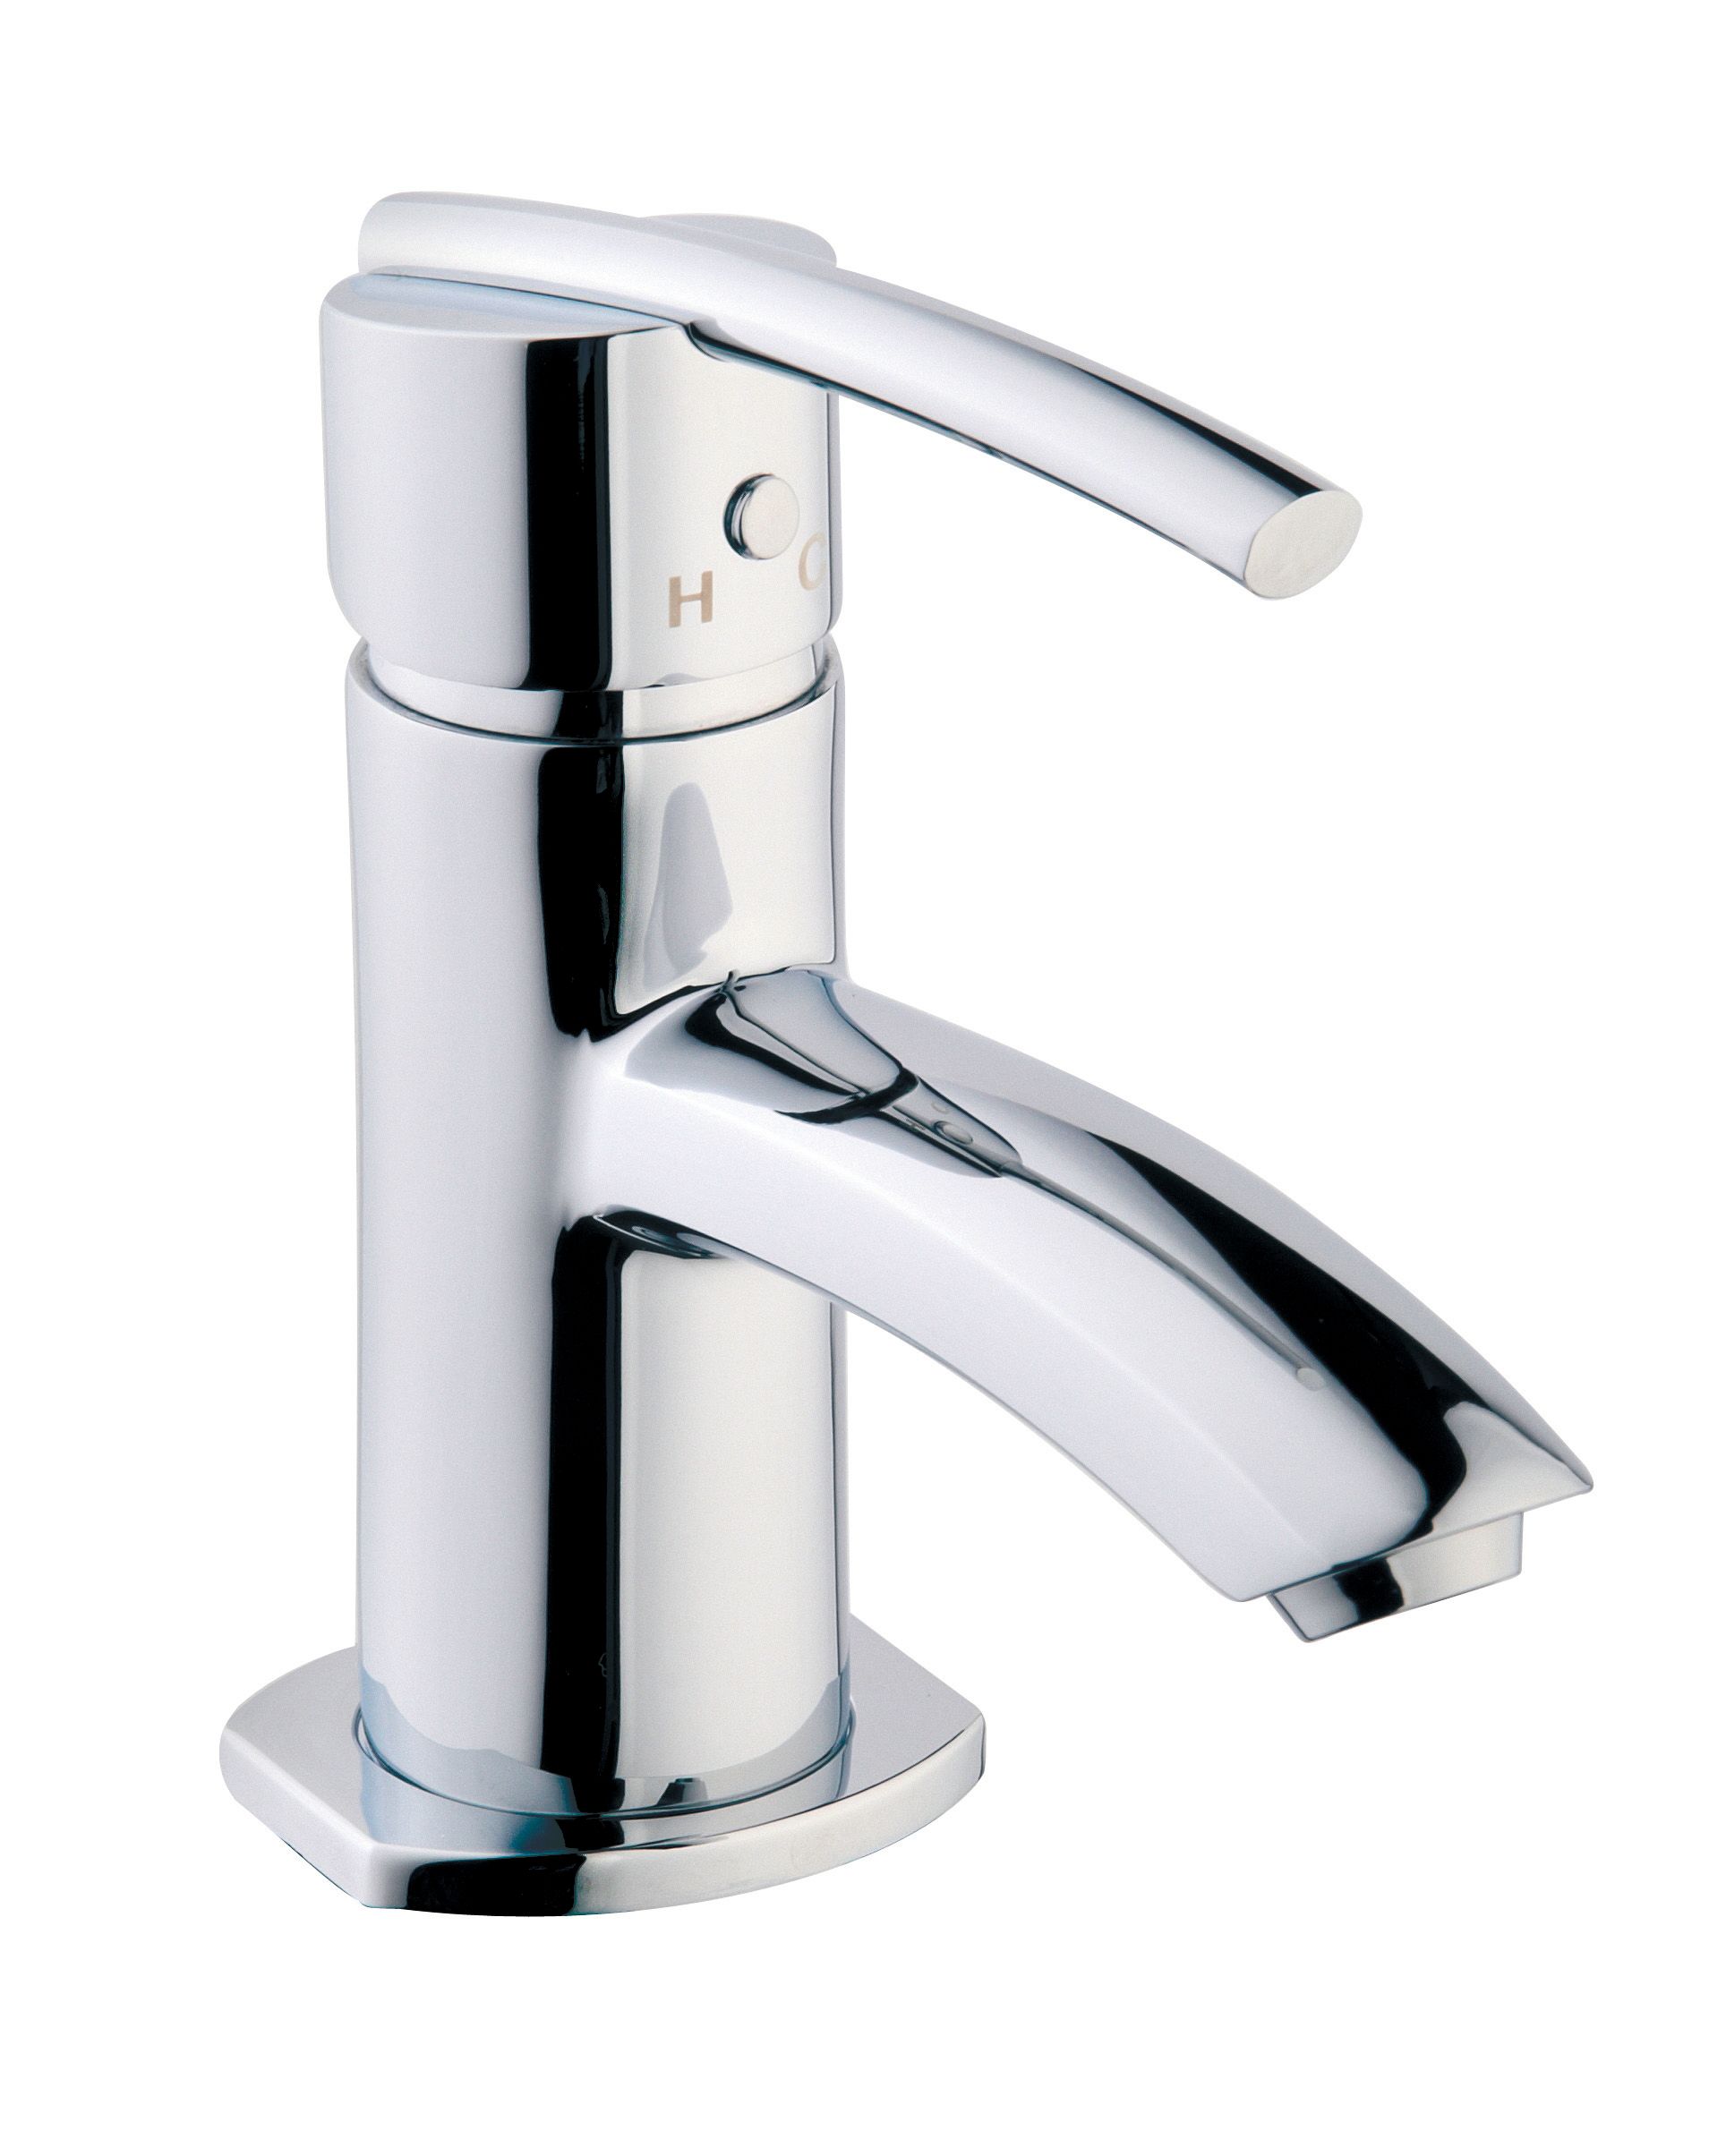 Wickes Versaille Compact Basin Mixer Tap - Chrome